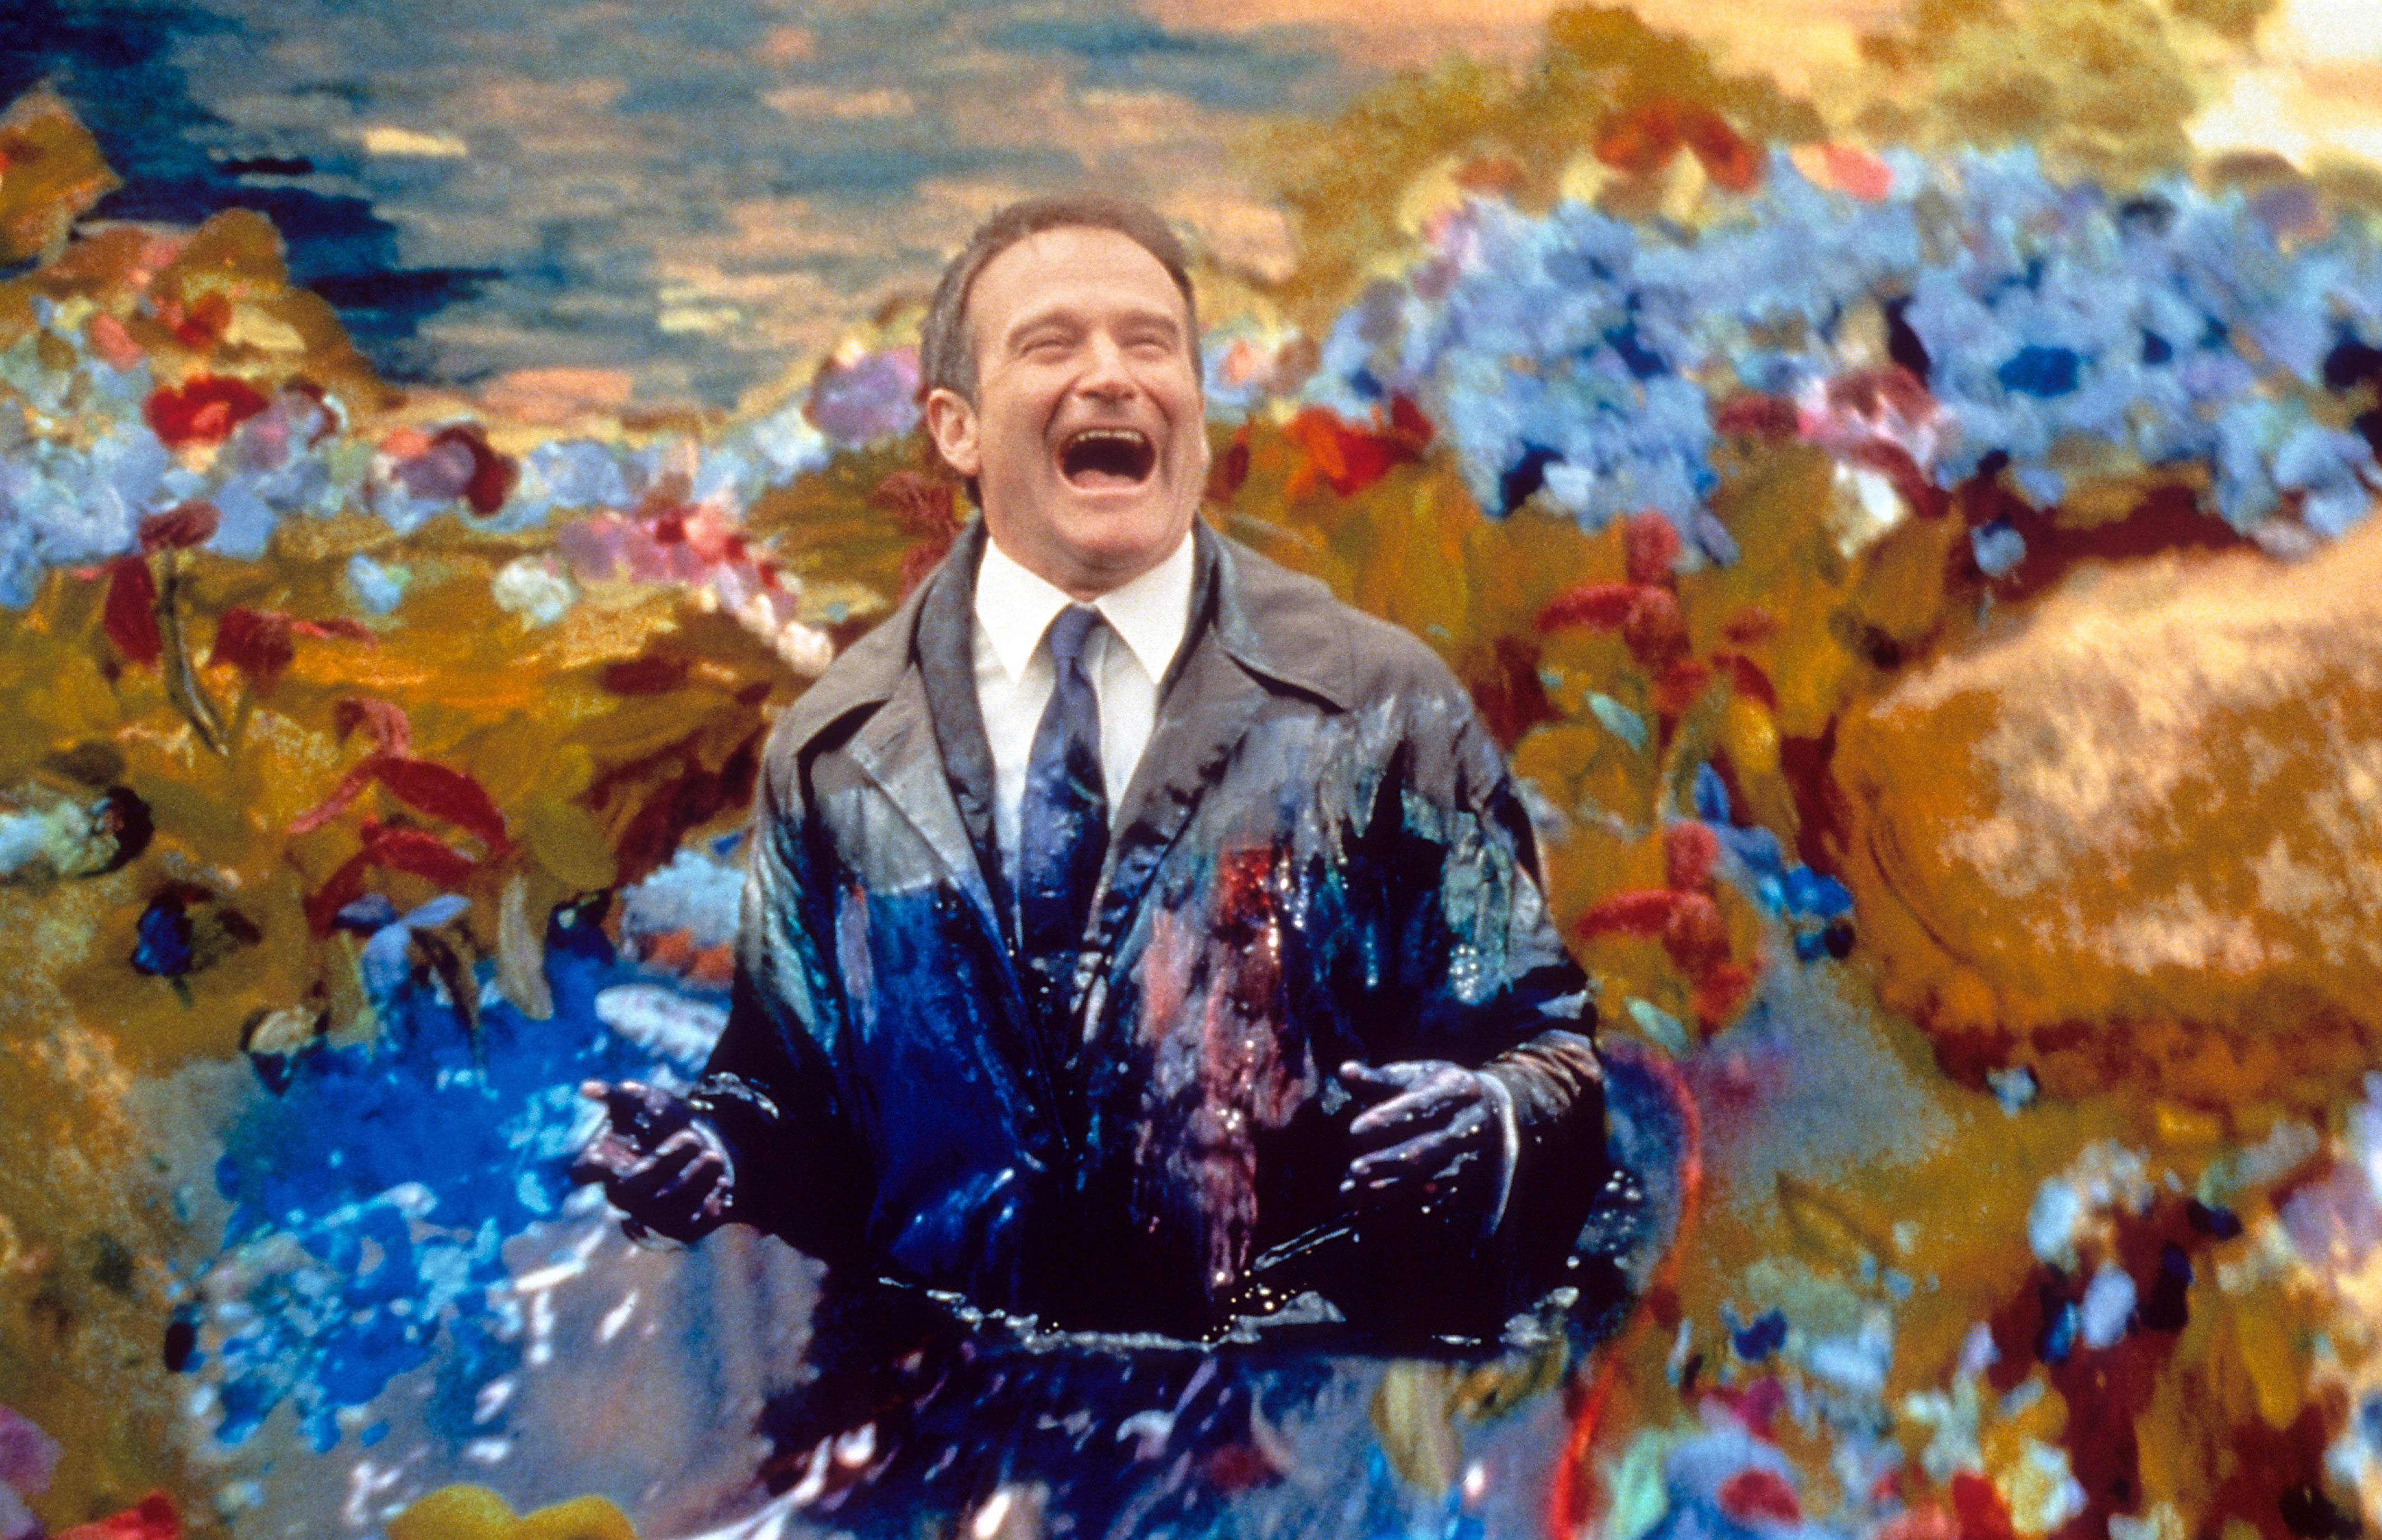 Robin Williams is covered in paint in a scene from the film "What Dreams May Come," in 1998 | Source: Getty Images